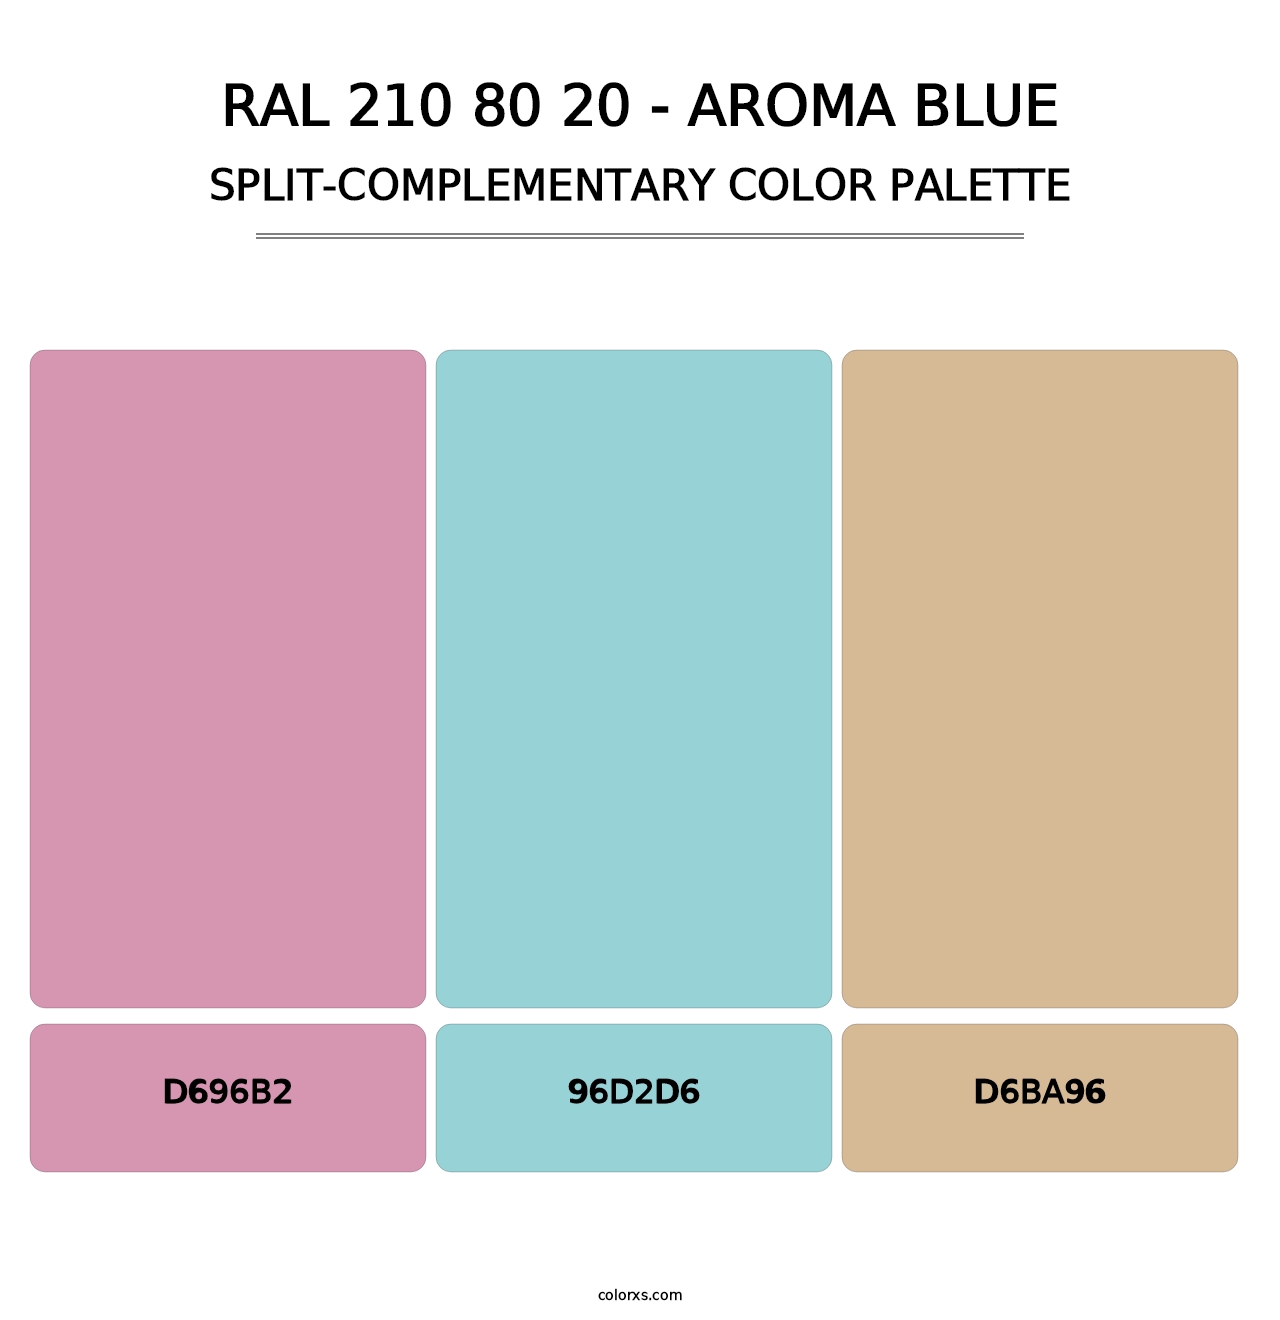 RAL 210 80 20 - Aroma Blue - Split-Complementary Color Palette